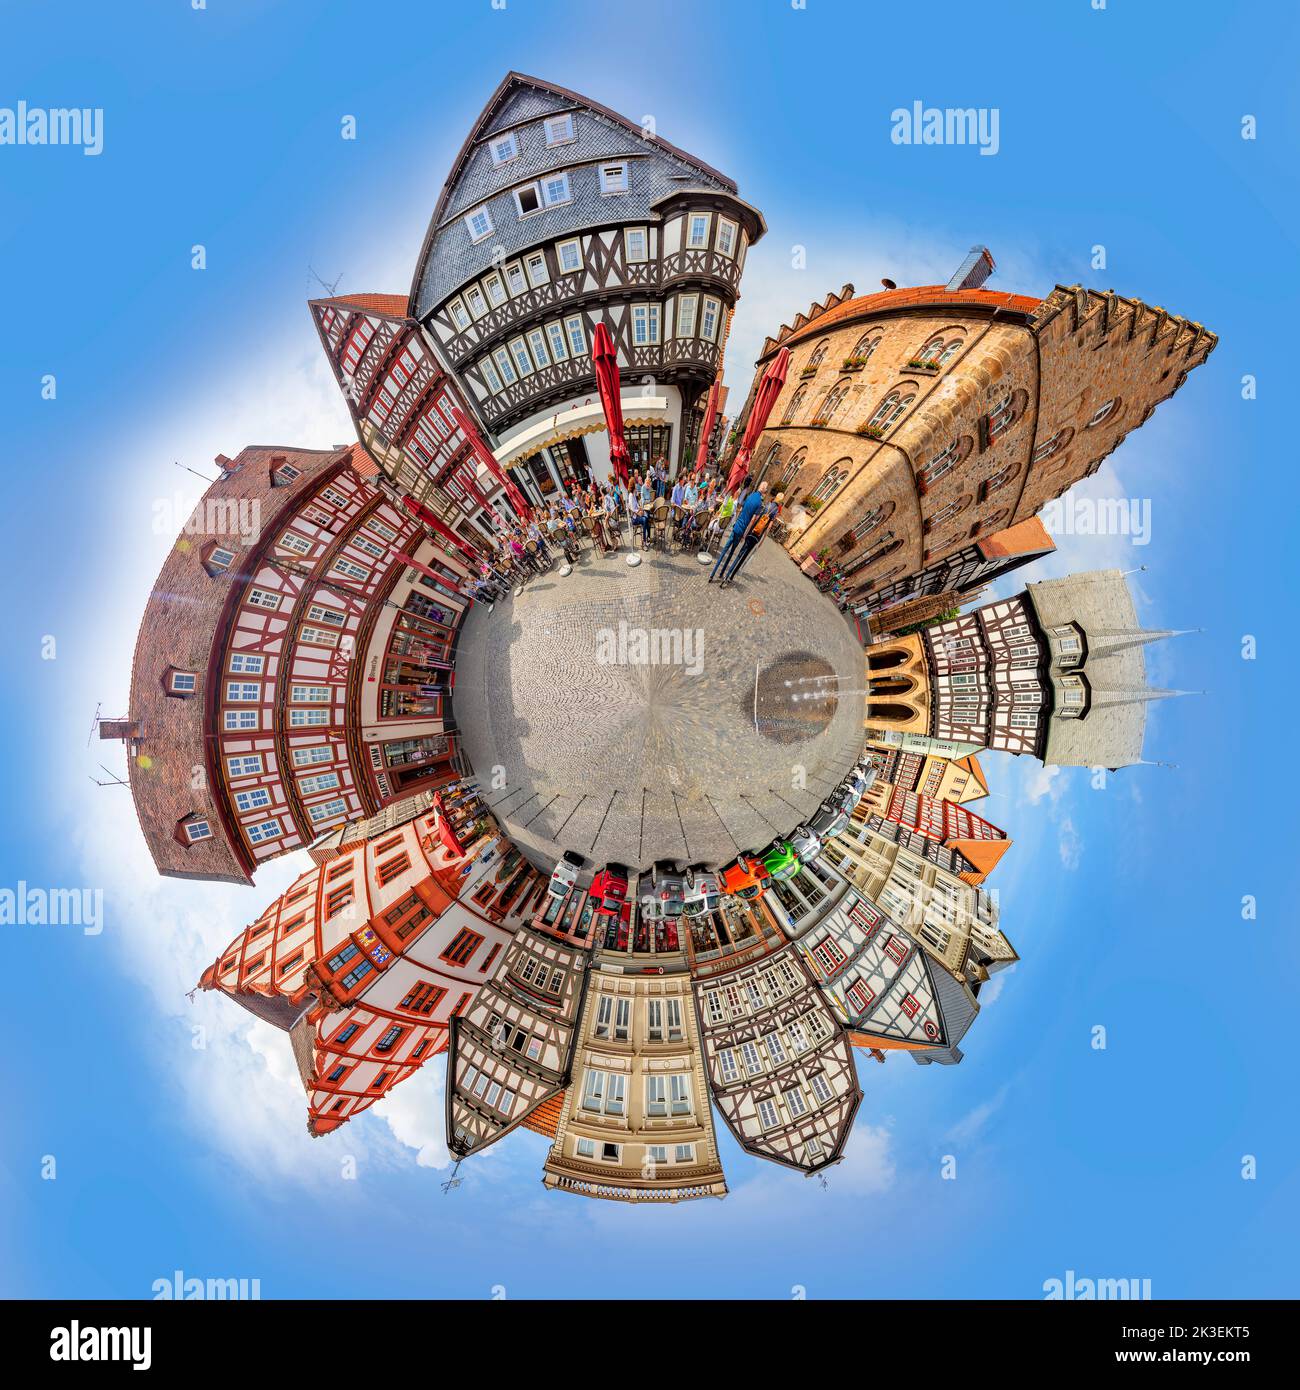 Alsfeld, Germany - June 25, 2021: tiny world format at famous town hall and half timbered historic houses at central square in Alsfeld, germany. Stock Photo